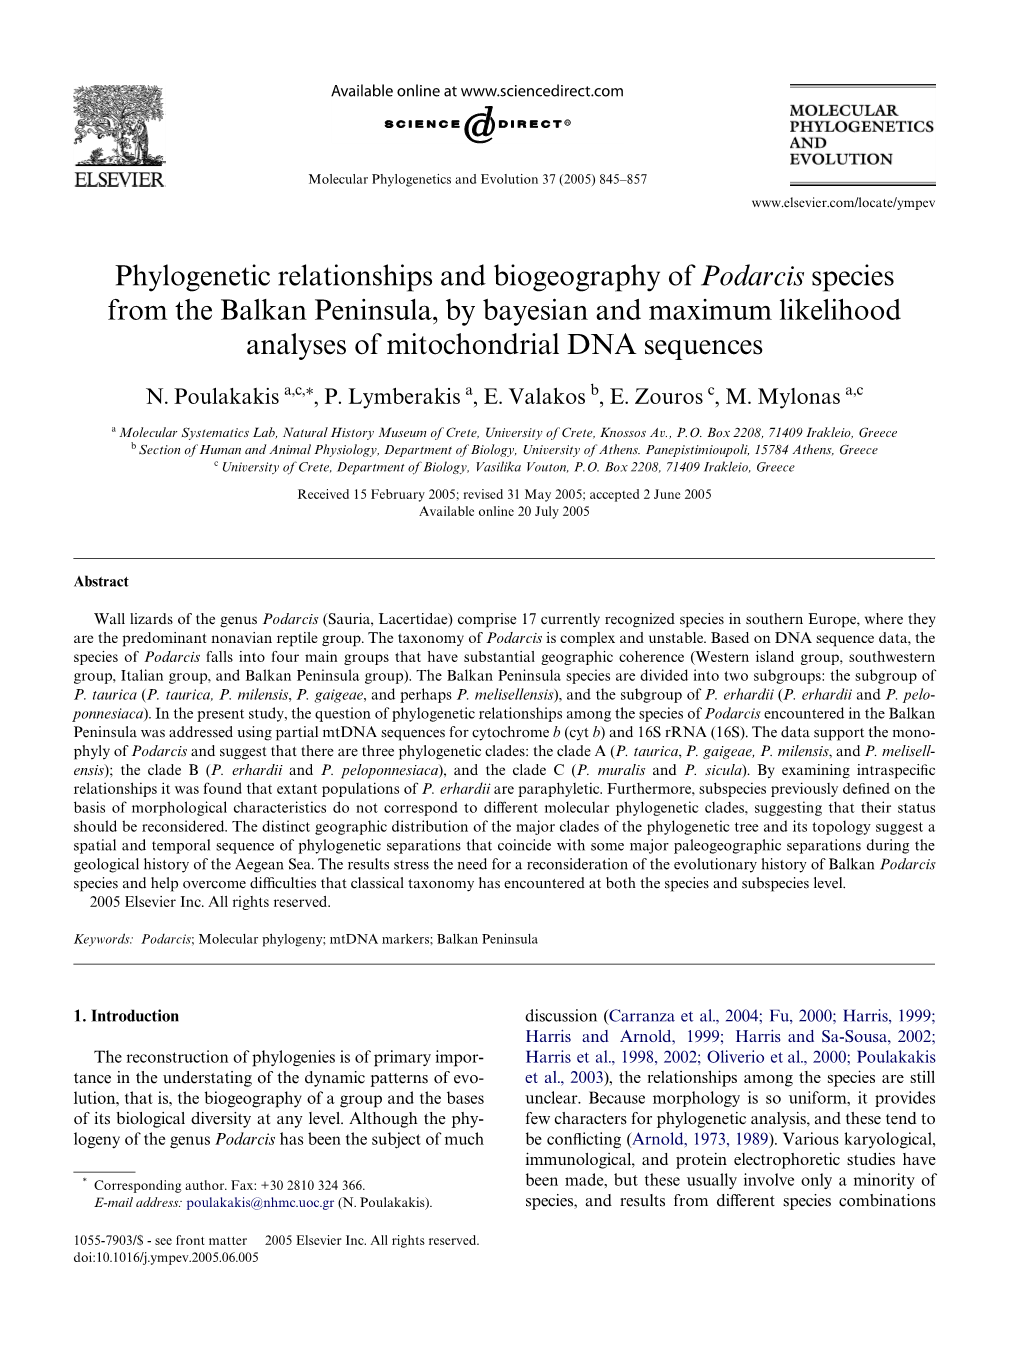 Phylogenetic Relationships and Biogeography of Podarcis Species from the Balkan Peninsula, by Bayesian and Maximum Likelihood Analyses of Mitochondrial DNA Sequences